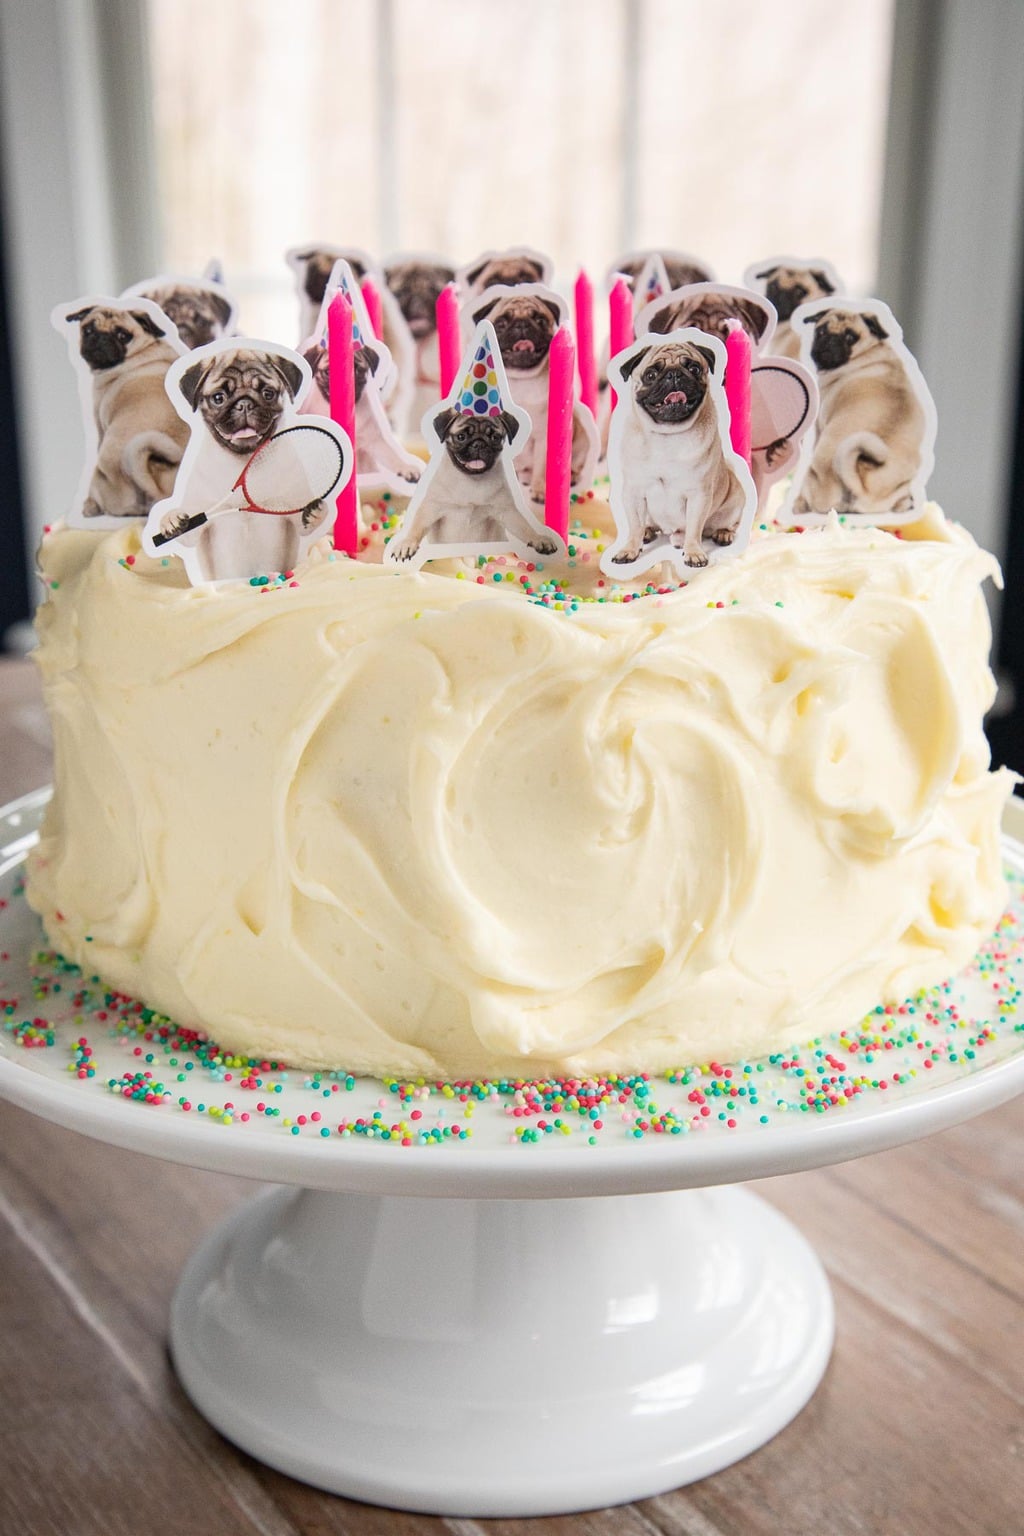 Photo of a Lemon Curd Poppy Seed Cake decorated for a "Pug" themed birthday party.